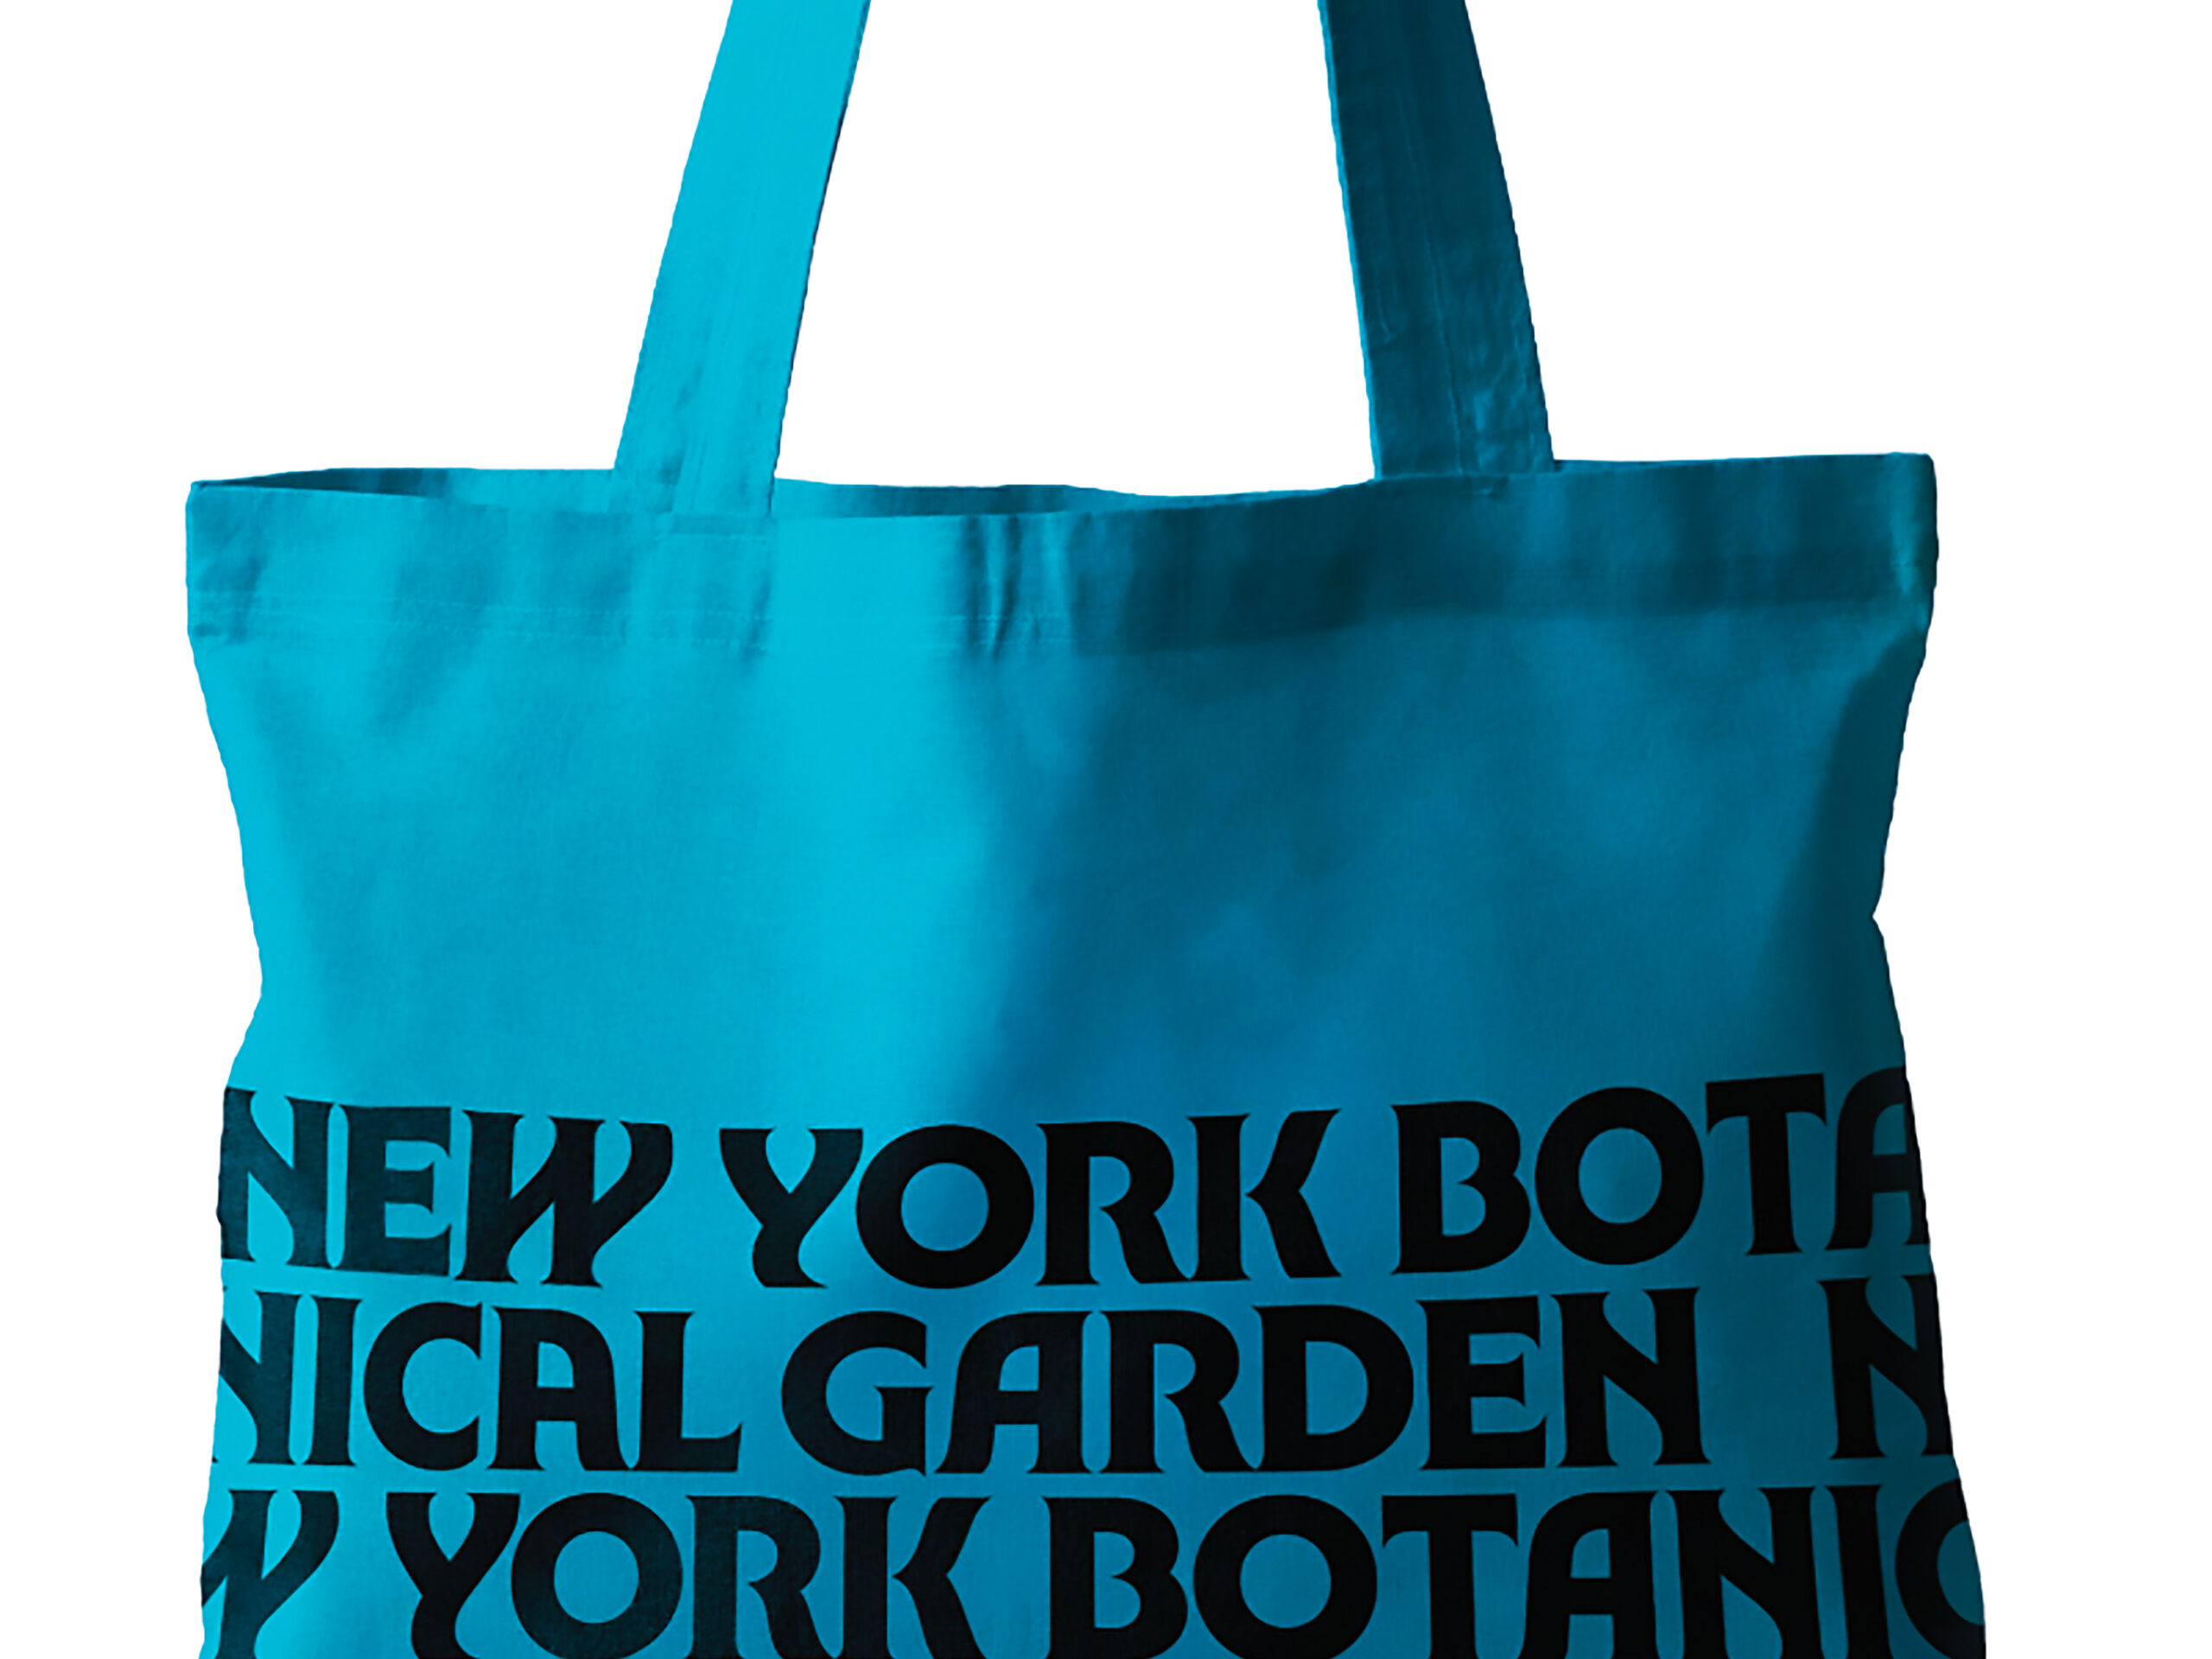 A blue canvas tote bag that reads 'NEW YORK BOTANICAL GARDEN'